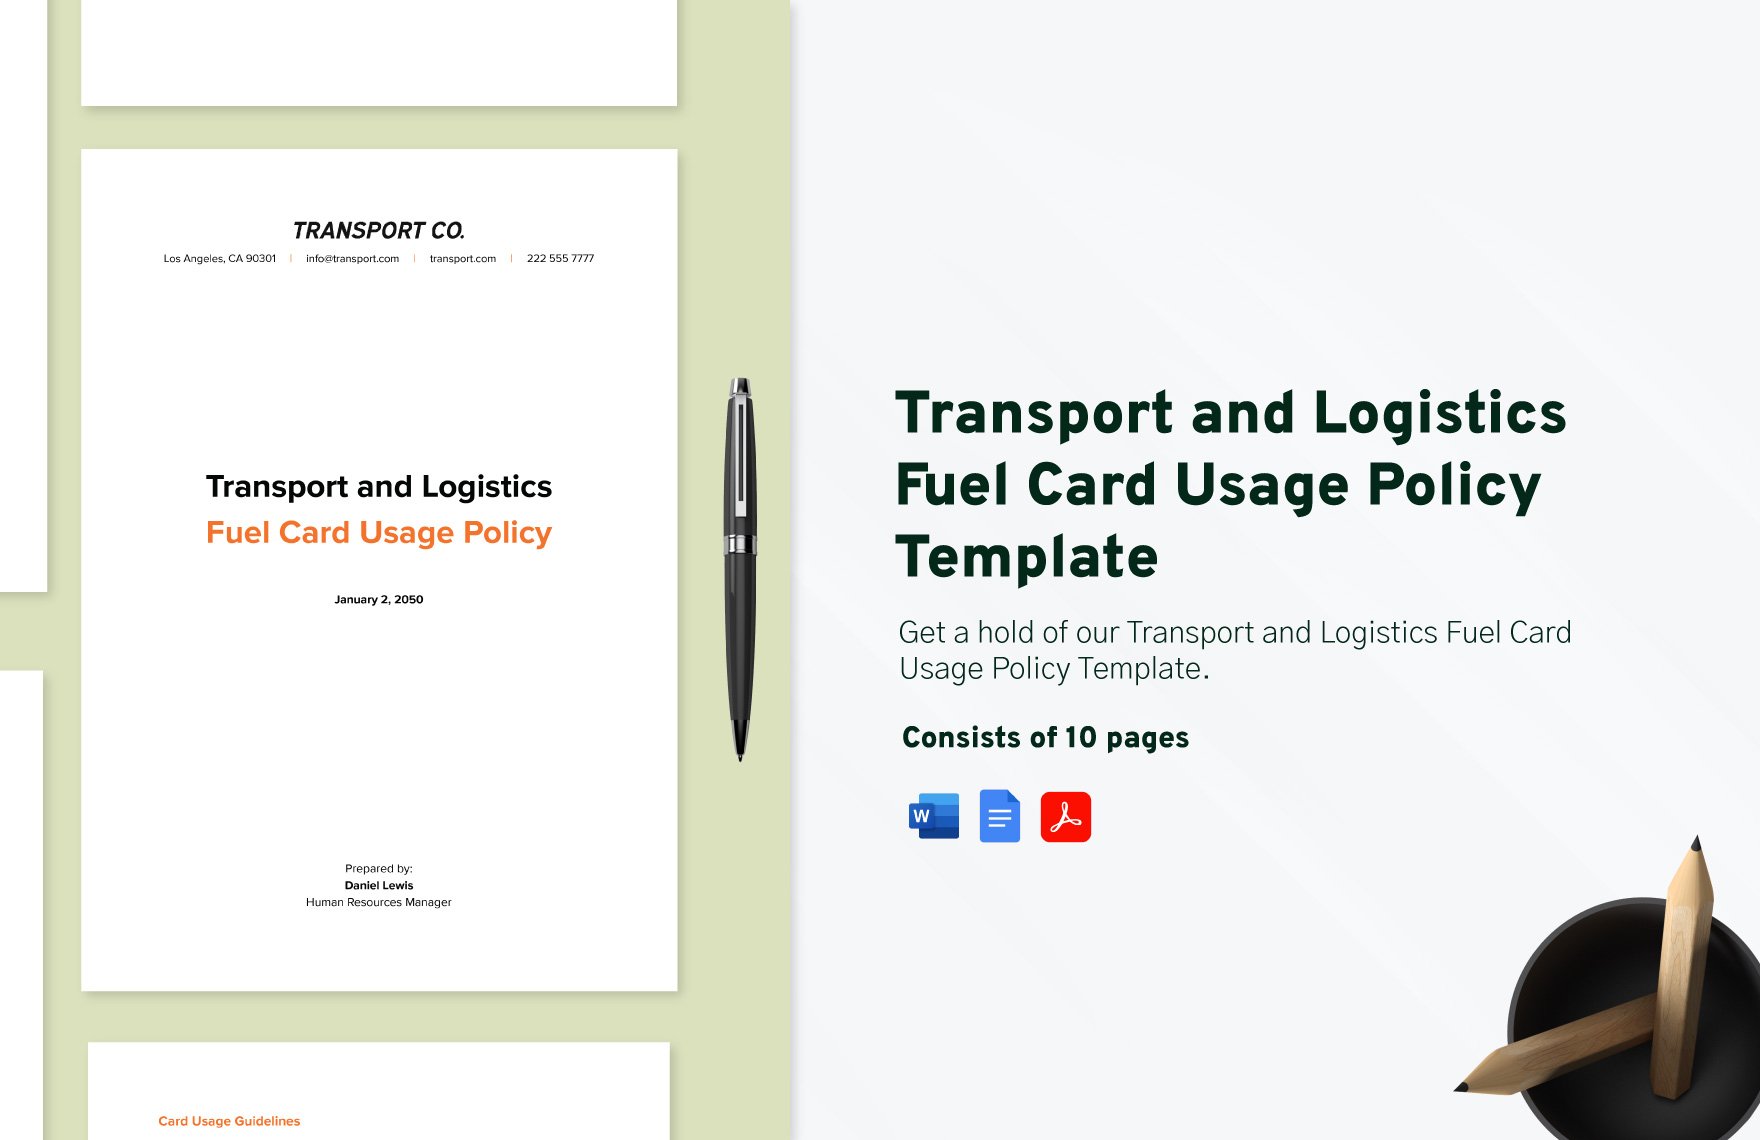 Transport and Logistics Fuel Card Usage Policy Template